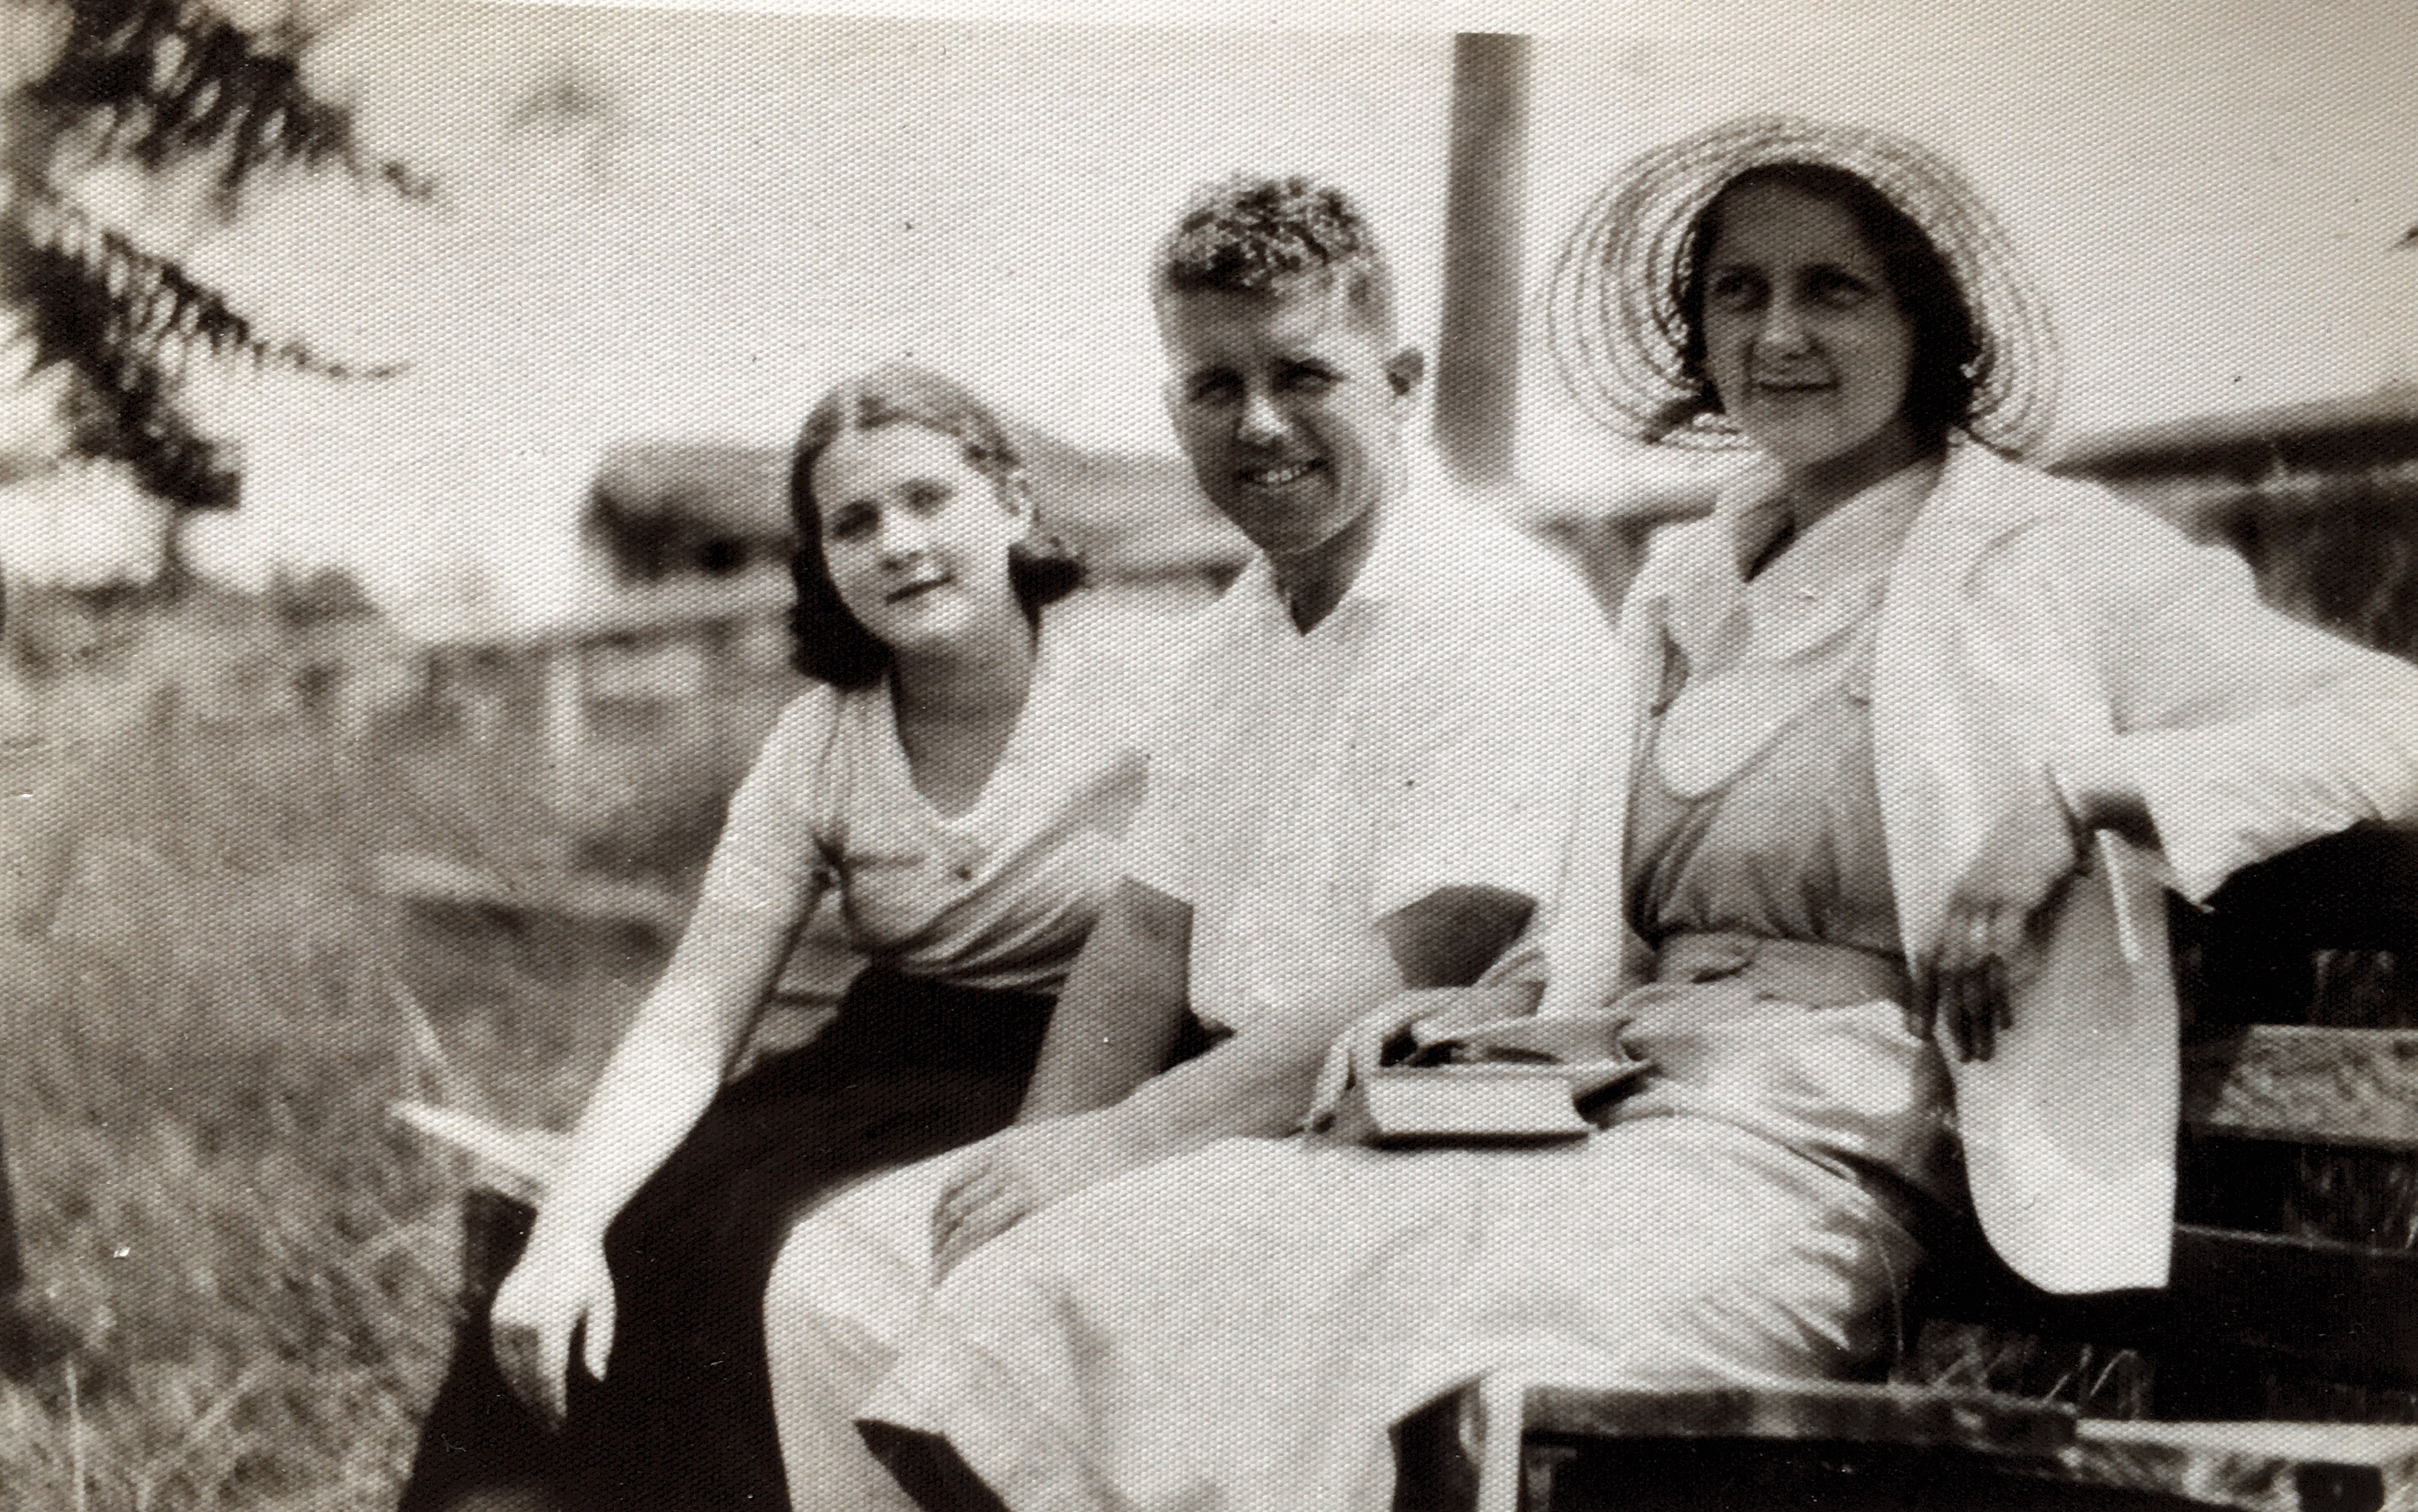 Frank with 2 girl friends in the late 1920s